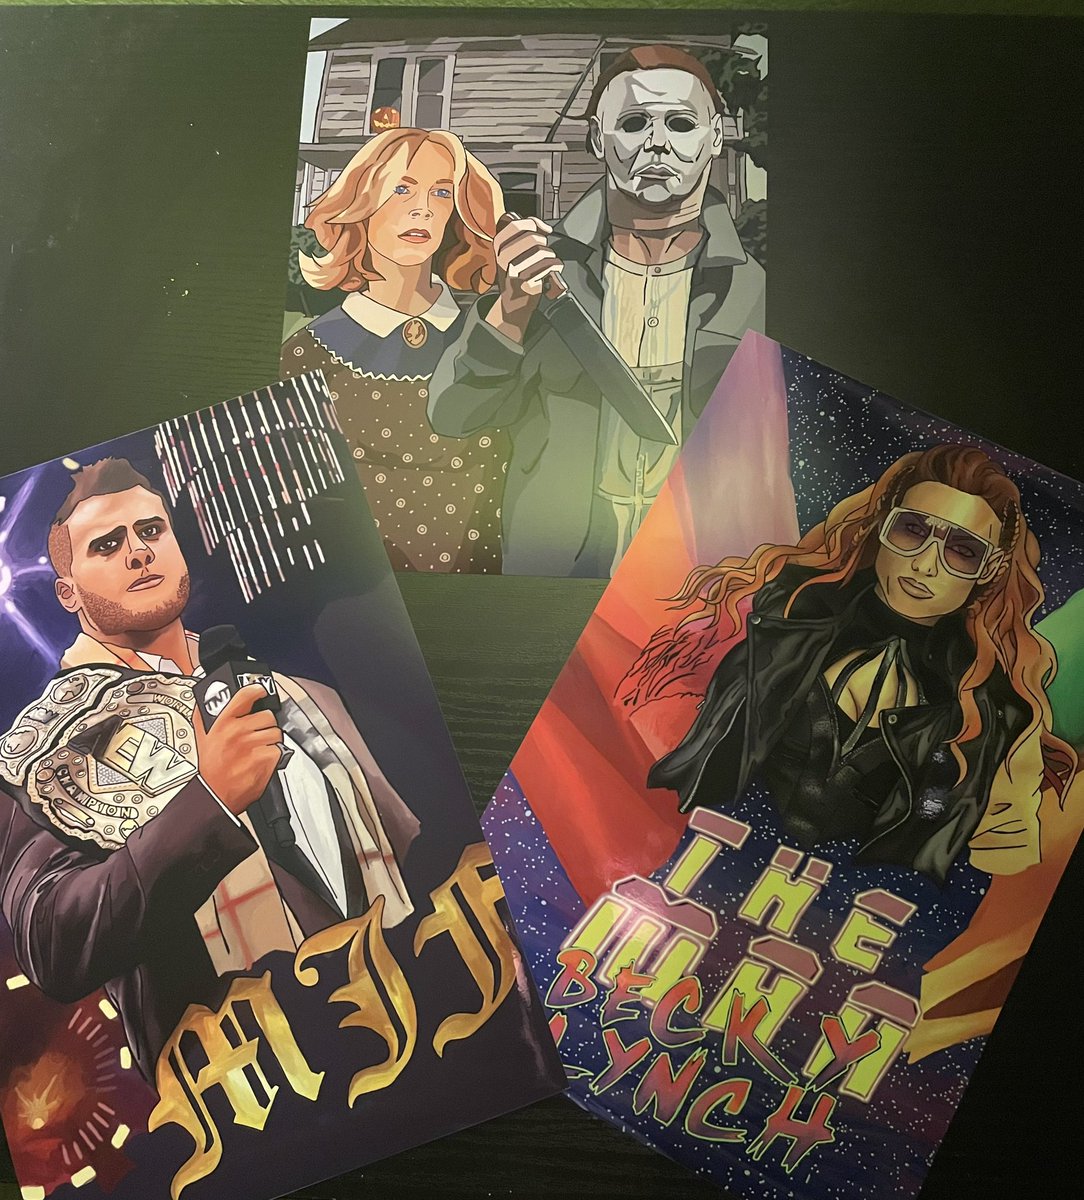 Prints are now available on Facebook Marketplace and Etsy!! Get your #OriginalArtPrints of #Halloween #AmericanGothic #Mashup “American Halloween” in 8X10 OR #AEWWorldChampion #MJF and #TheMan #BeckyLynch in 8X12!!! gwinningdesigns.etsy.com